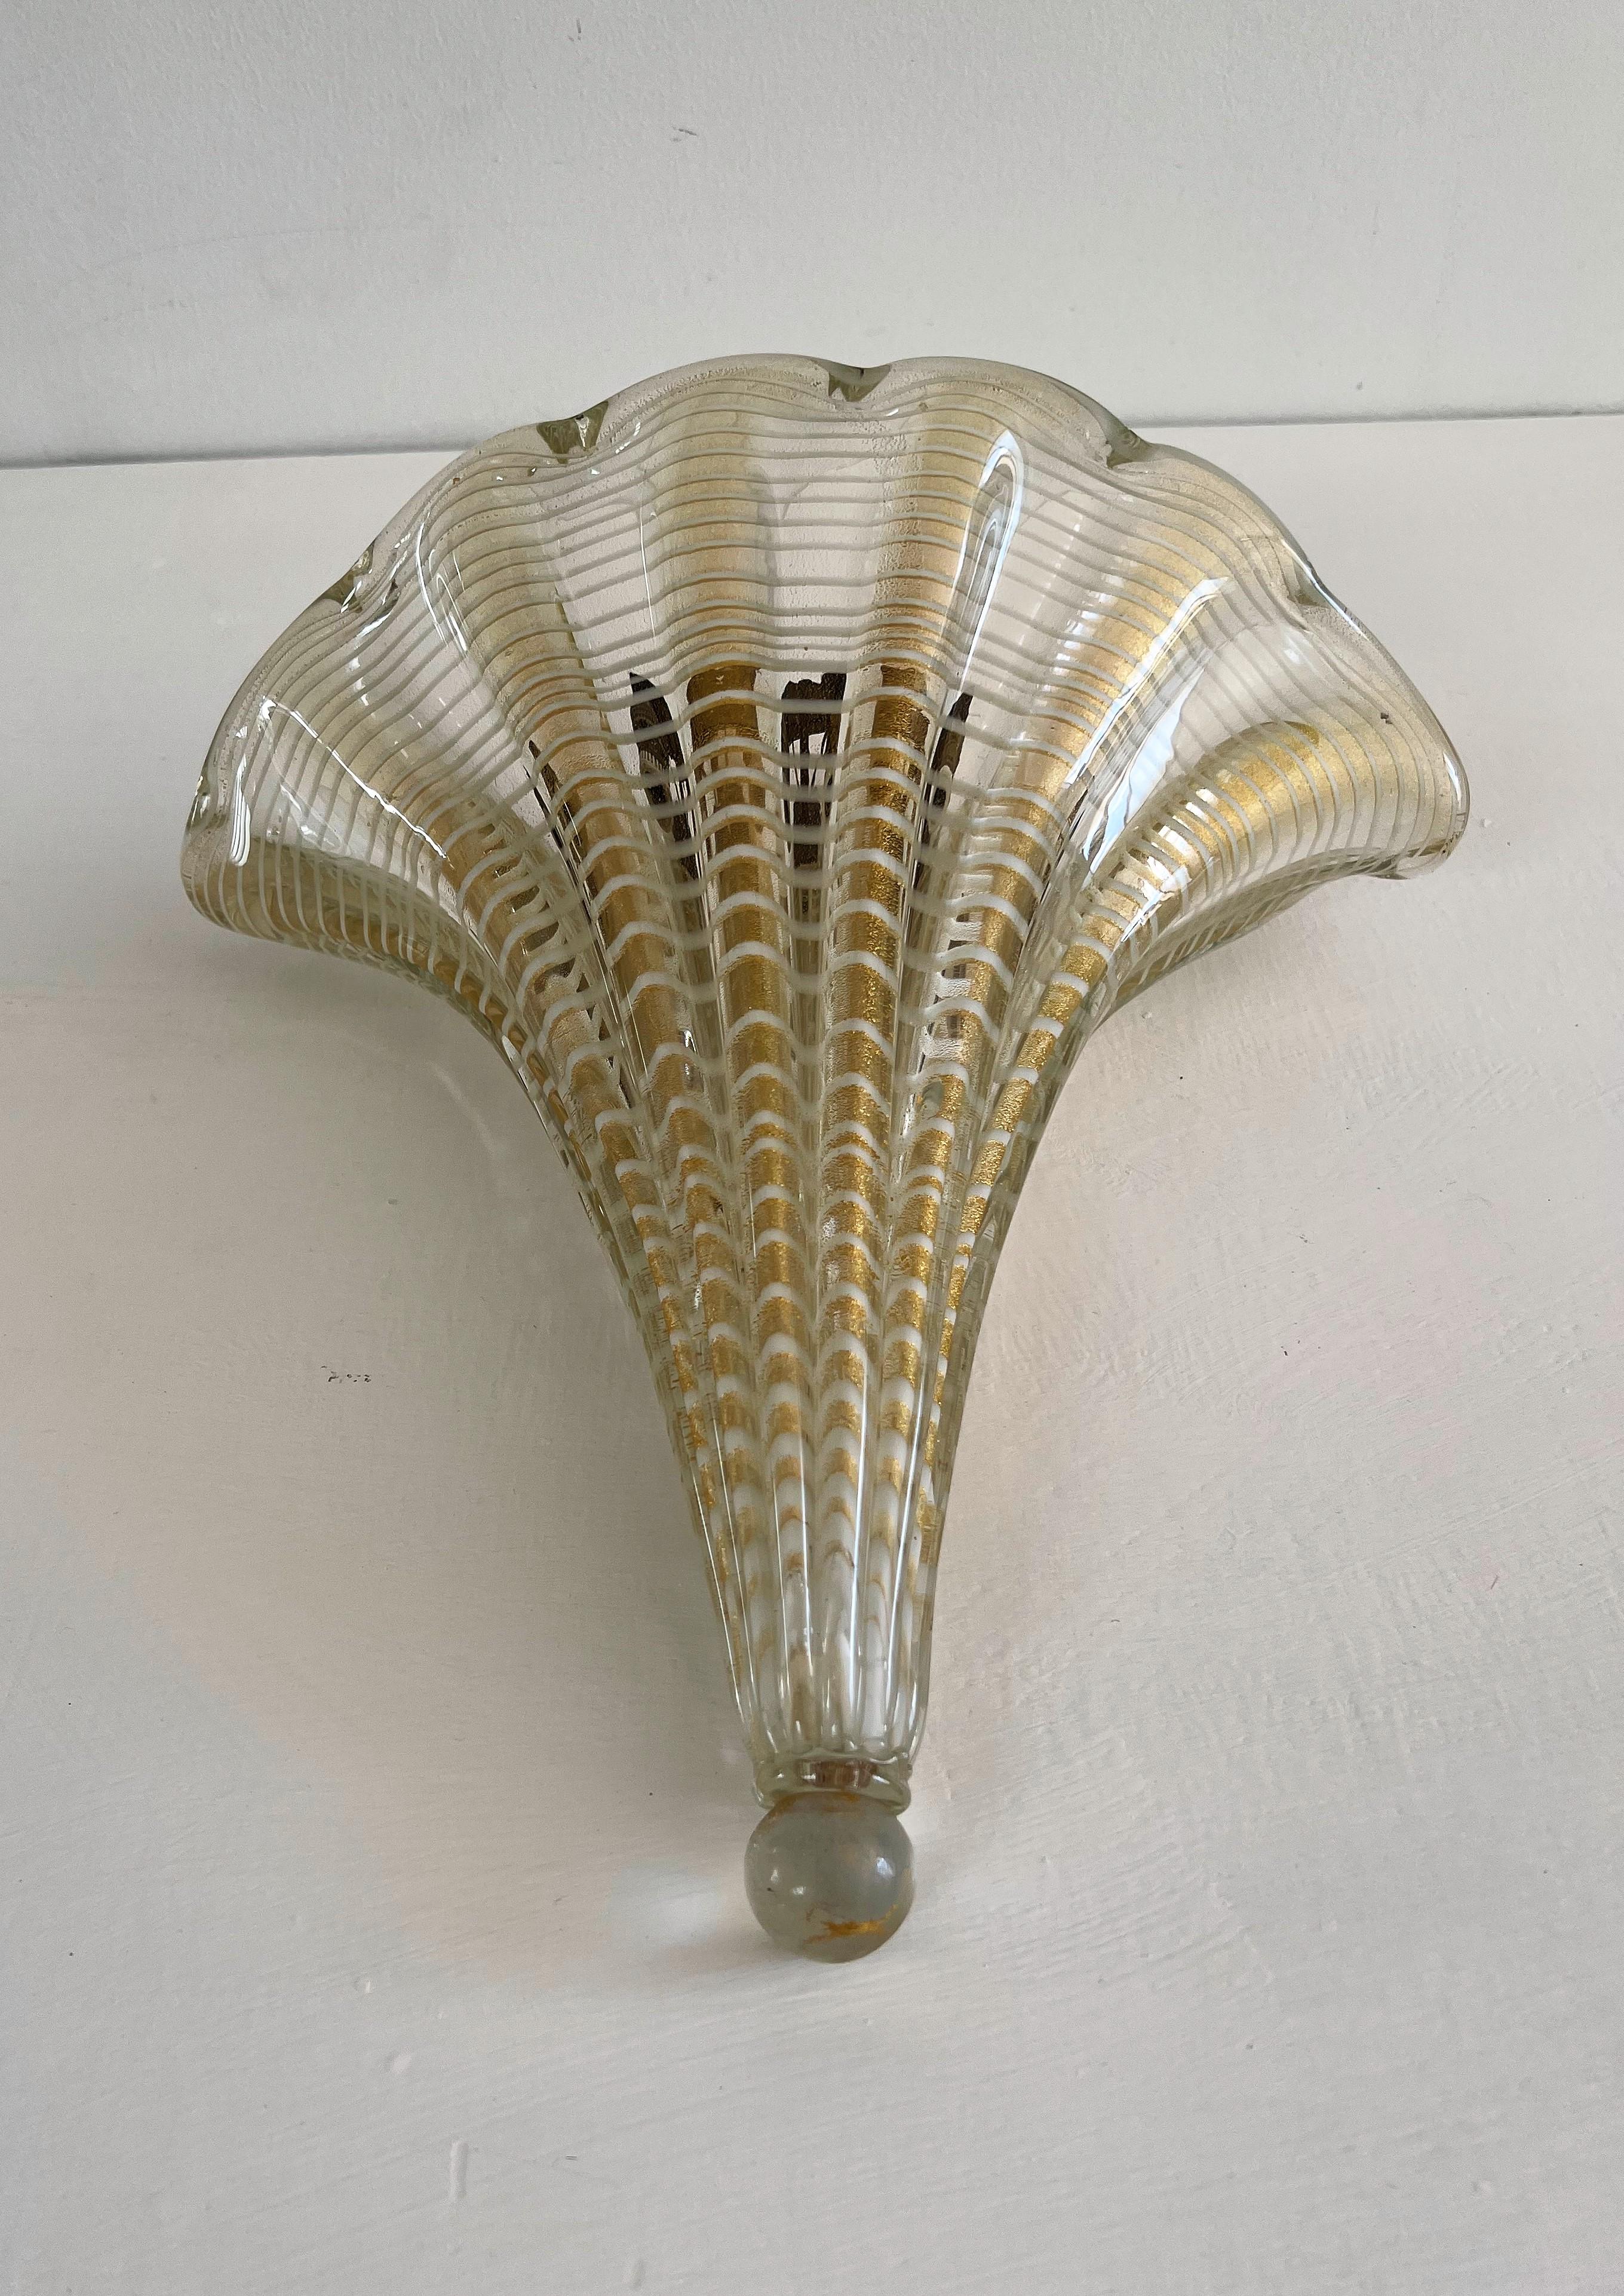 Large wall light or sconce manufactured in one large piece of Murano glass with gold inclusions in the 